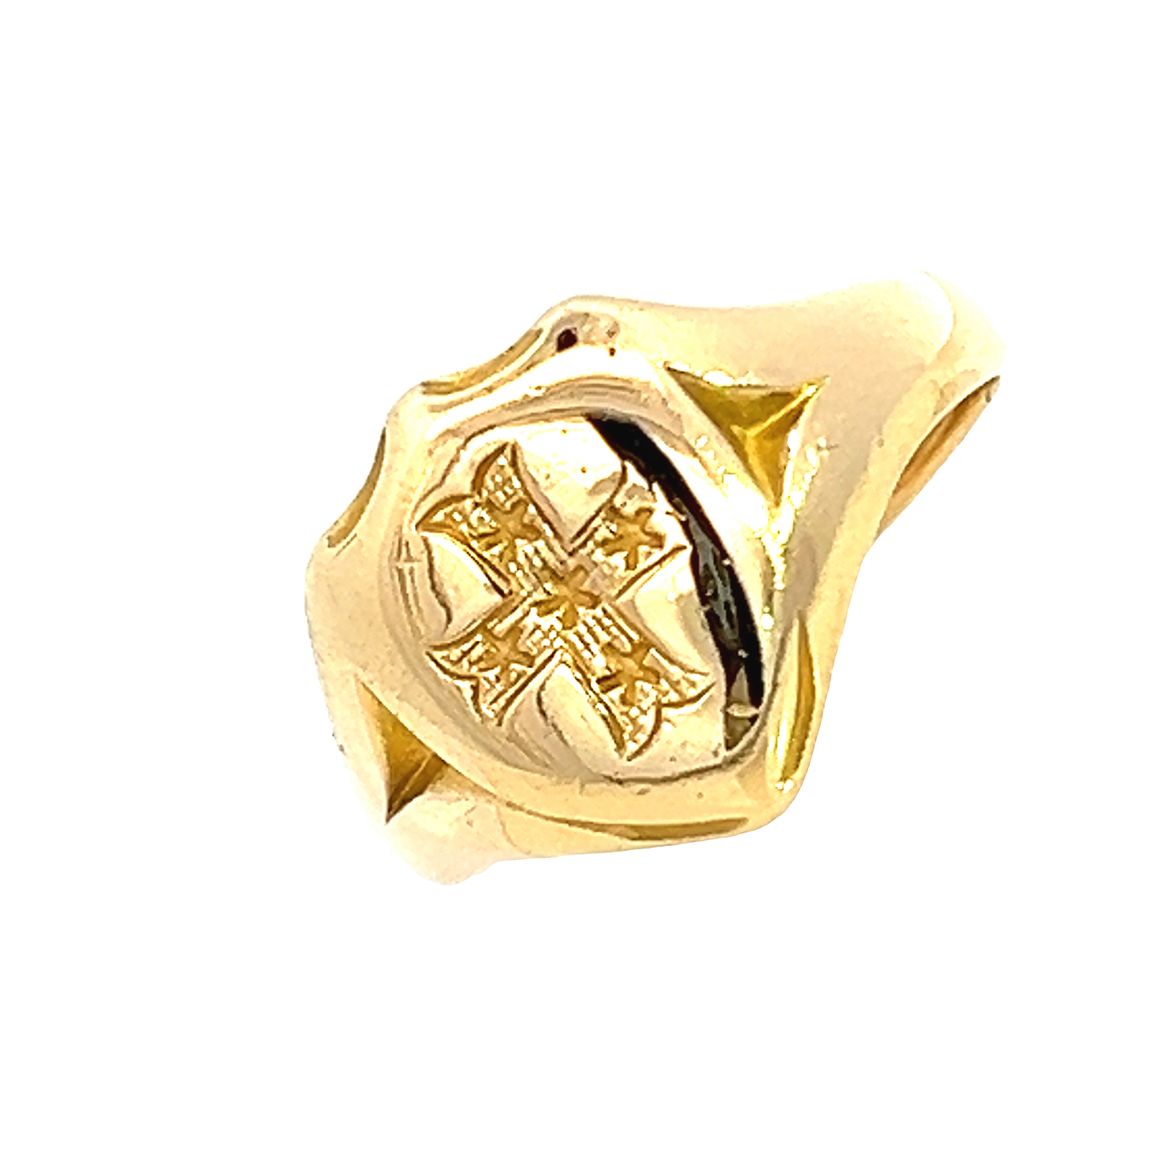 A 18ct yellow Gold Signet Ring with Seal